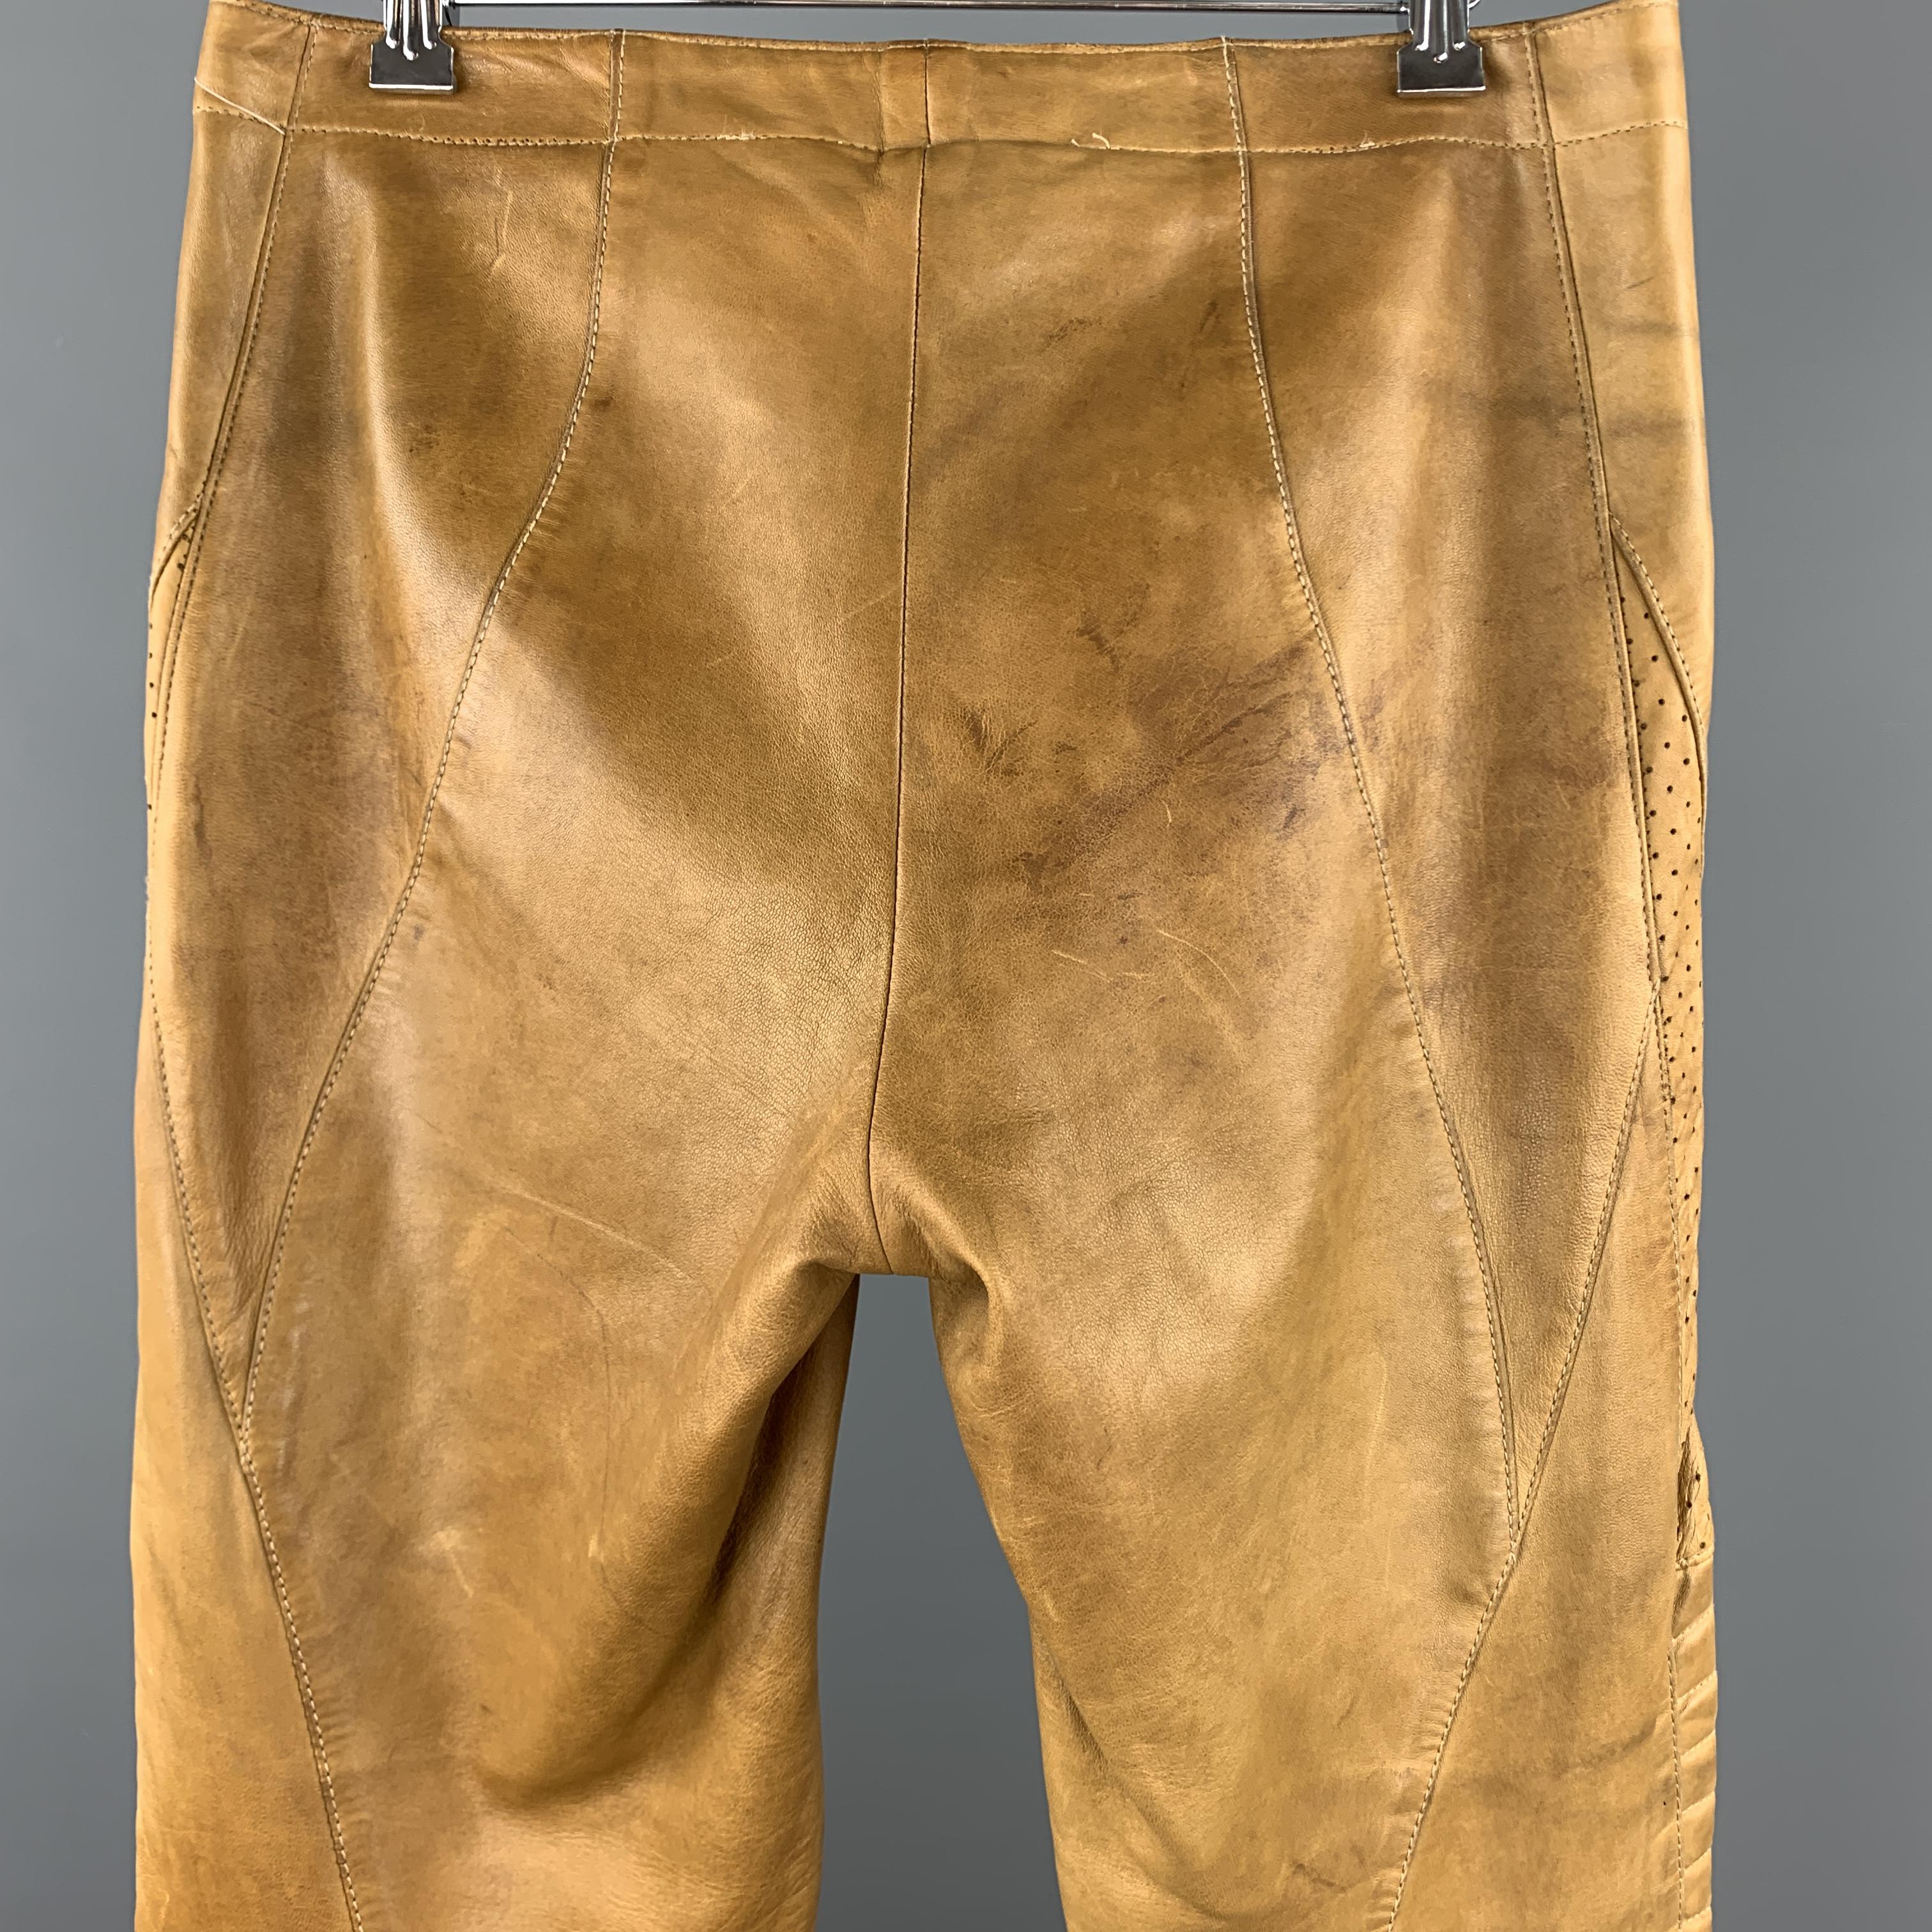 GUCCI by TOM FORD Size 30 Tan Leather Motorcycle Pants 3